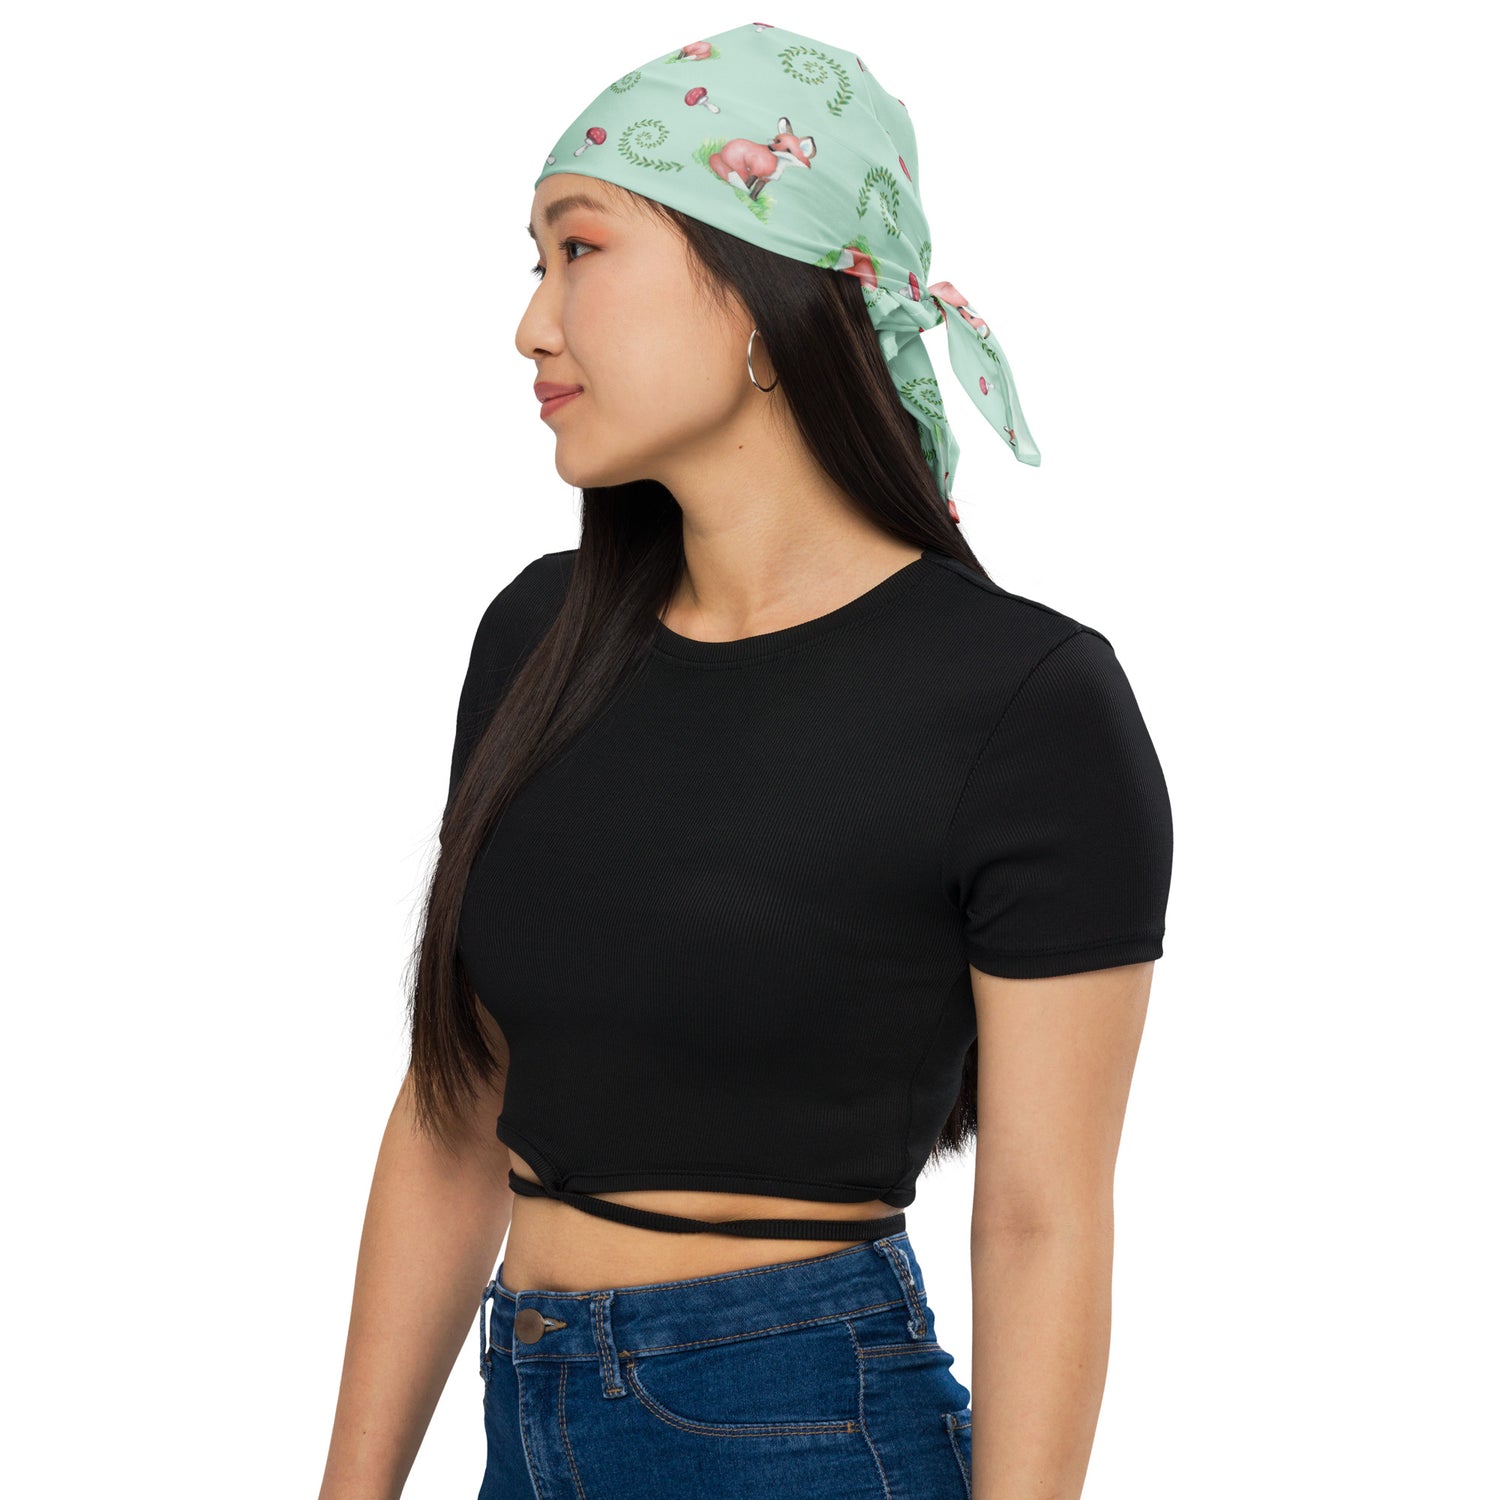 Forest fox bandana with watercolor foxes, mushrooms and ferns on light green fabric. Single-sided print. Made from microfiber polyester.  Shown on head of female model.